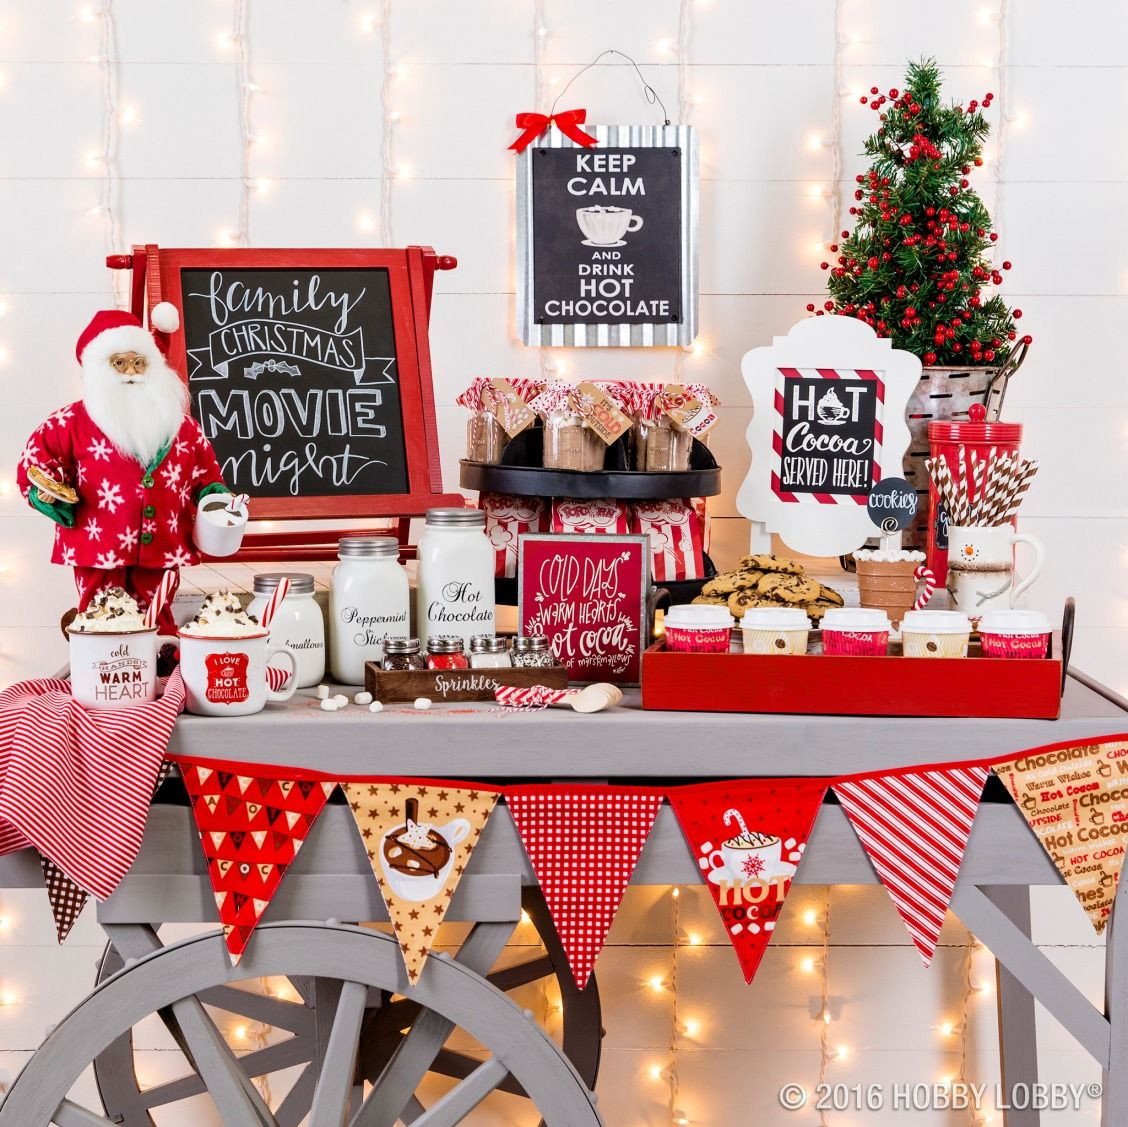 Friends Christmas Party Ideas
 This Christmas host a hot chocolate themed movie night